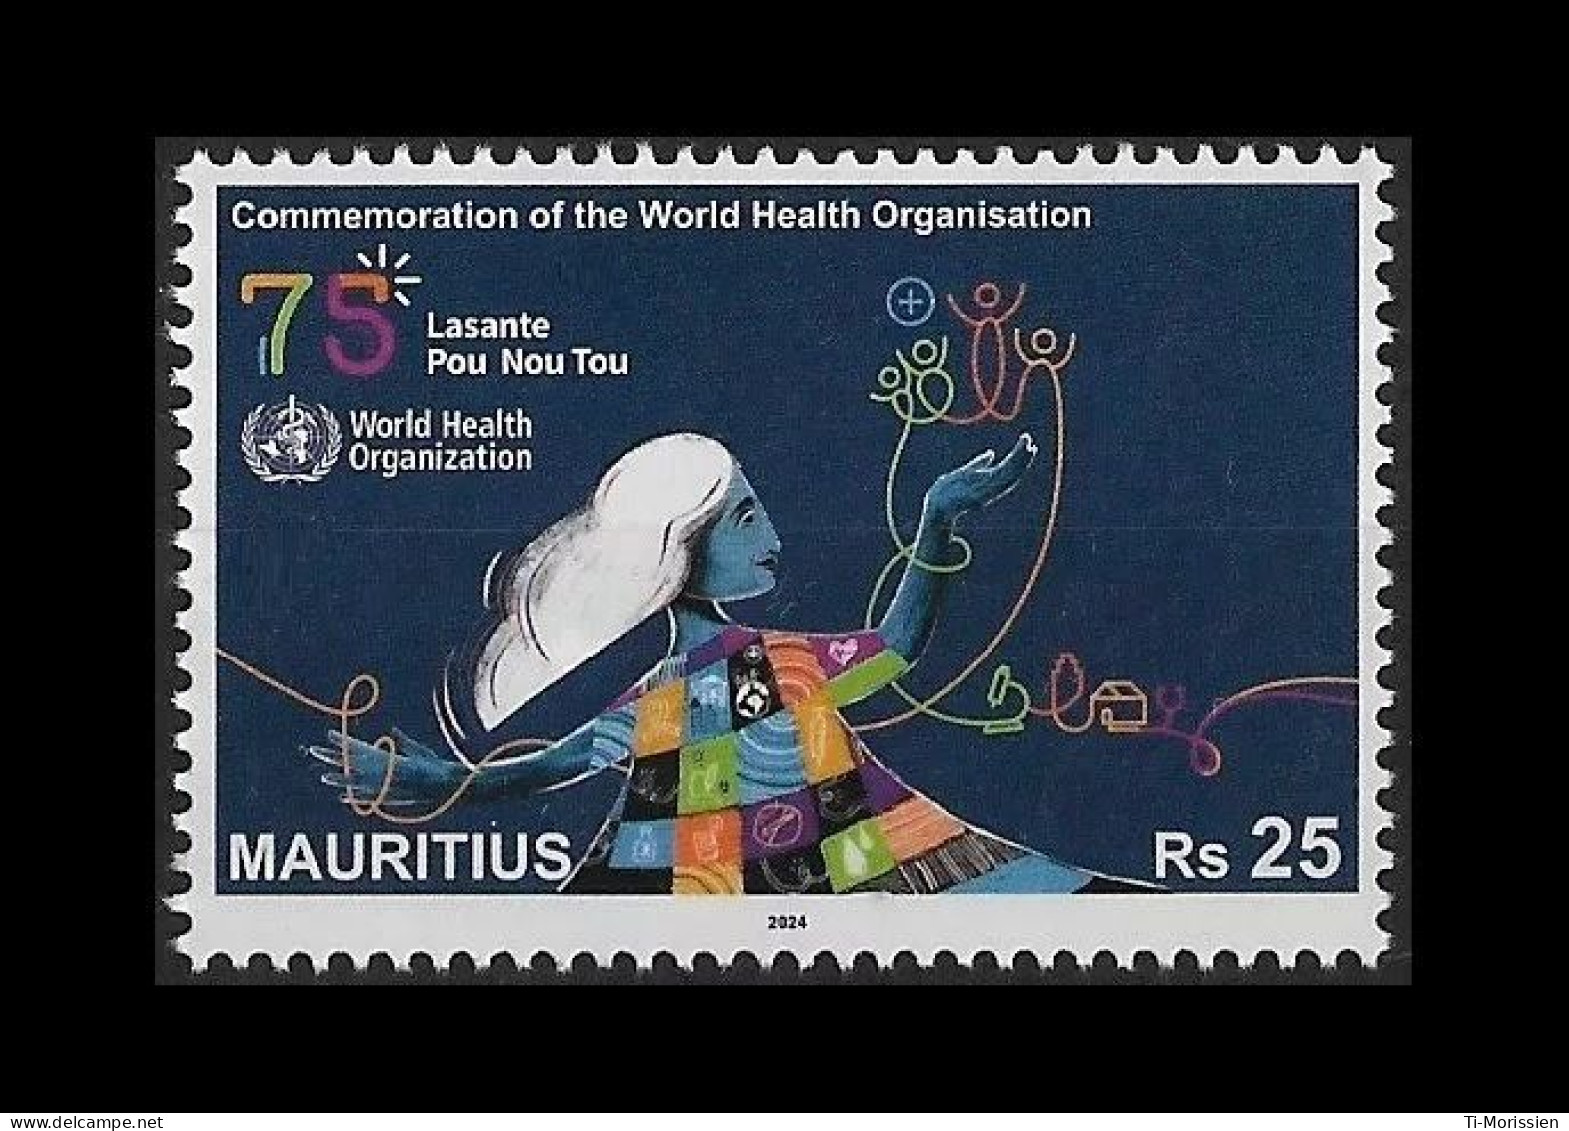 Mauritius(Ile Maurice) 2024 - Commemoration Of 75 Years Of World Health Organisation (WHO) - 1v MNH Complete Set - WHO